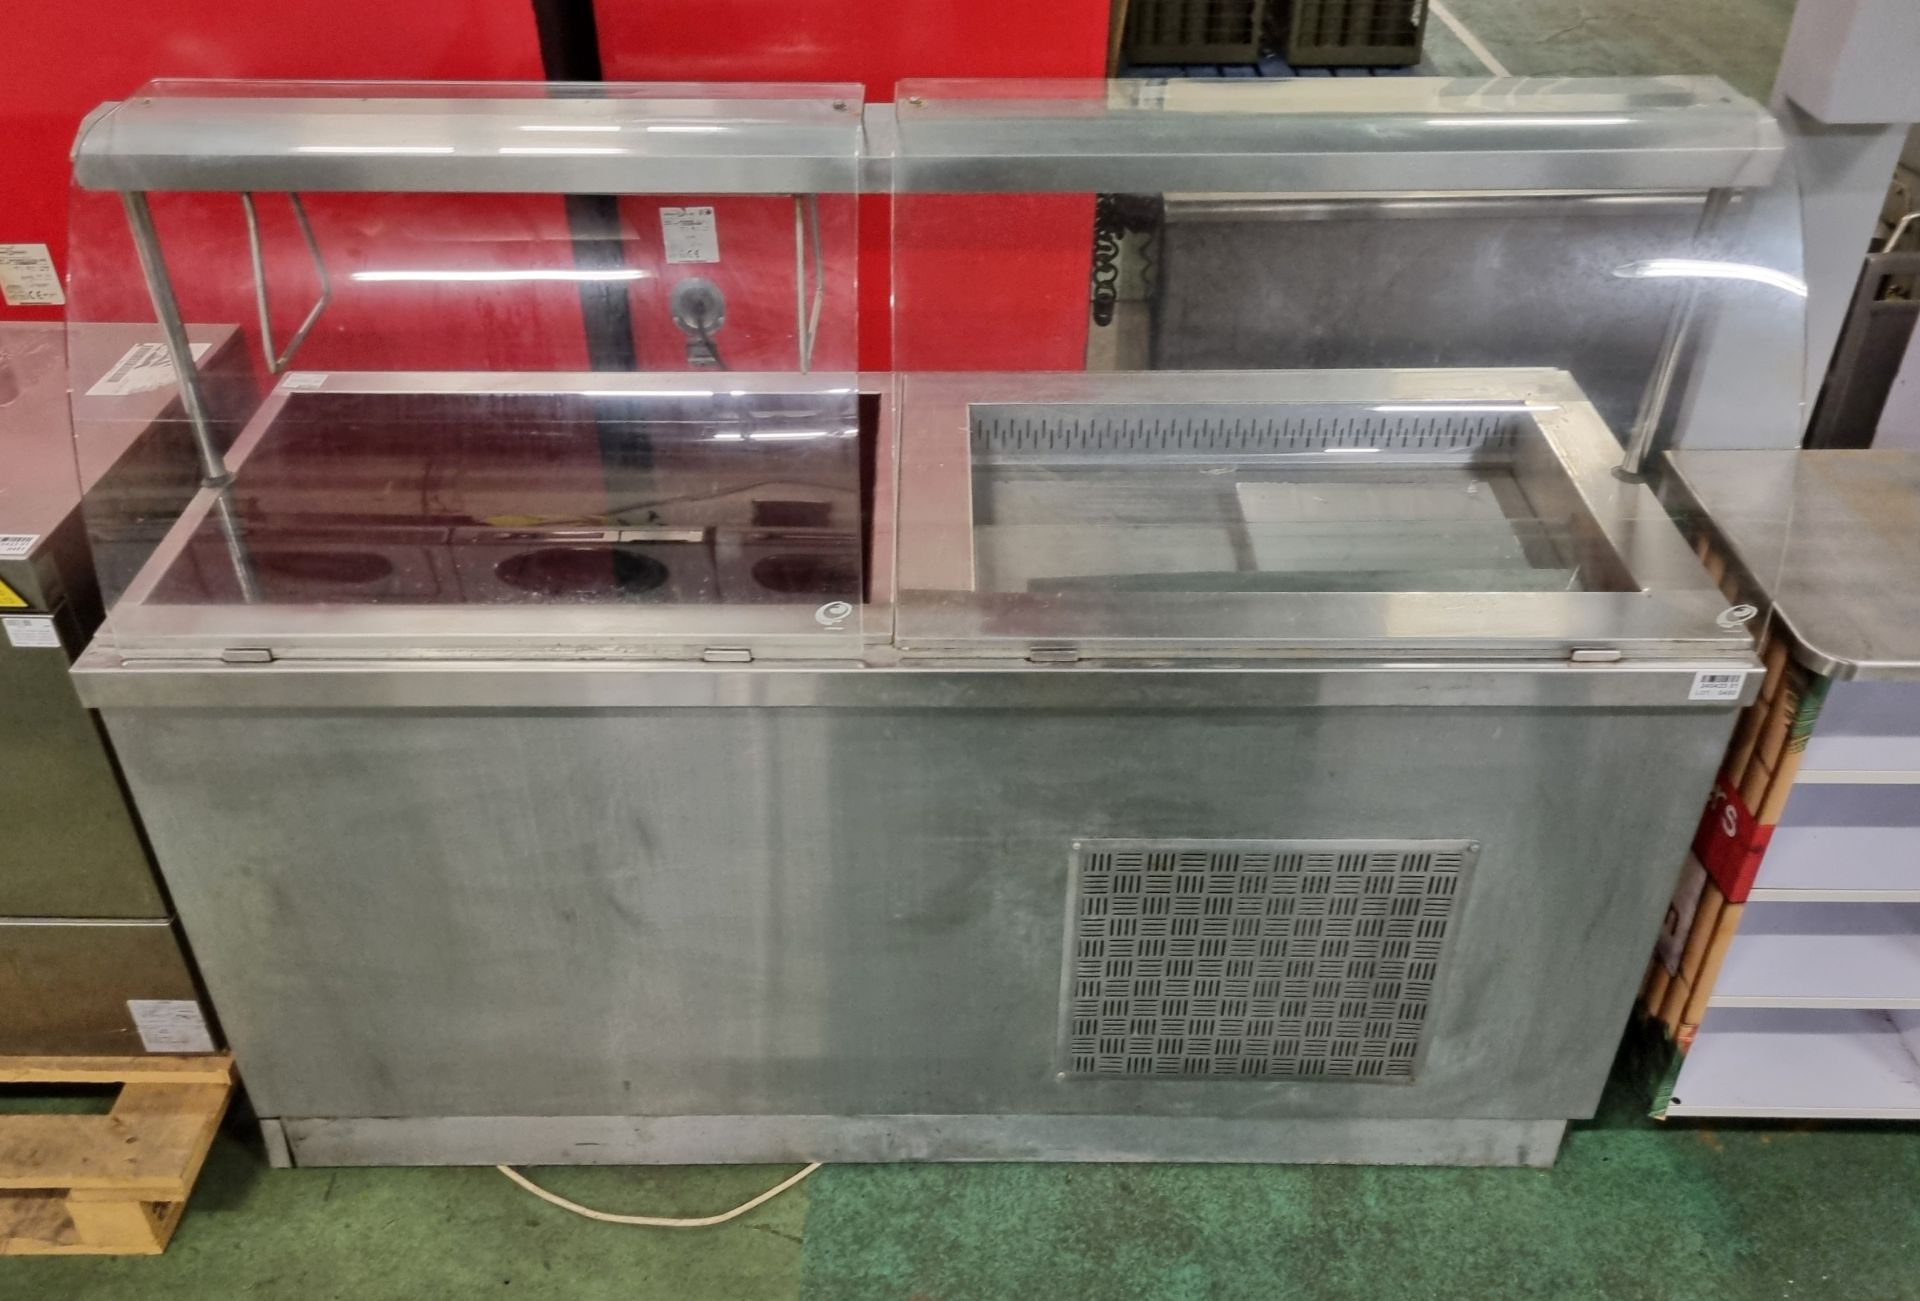 Stainless steel unit with bain marie & hot plate section - W 1800 x D 700 x H 1370mm - Image 2 of 6